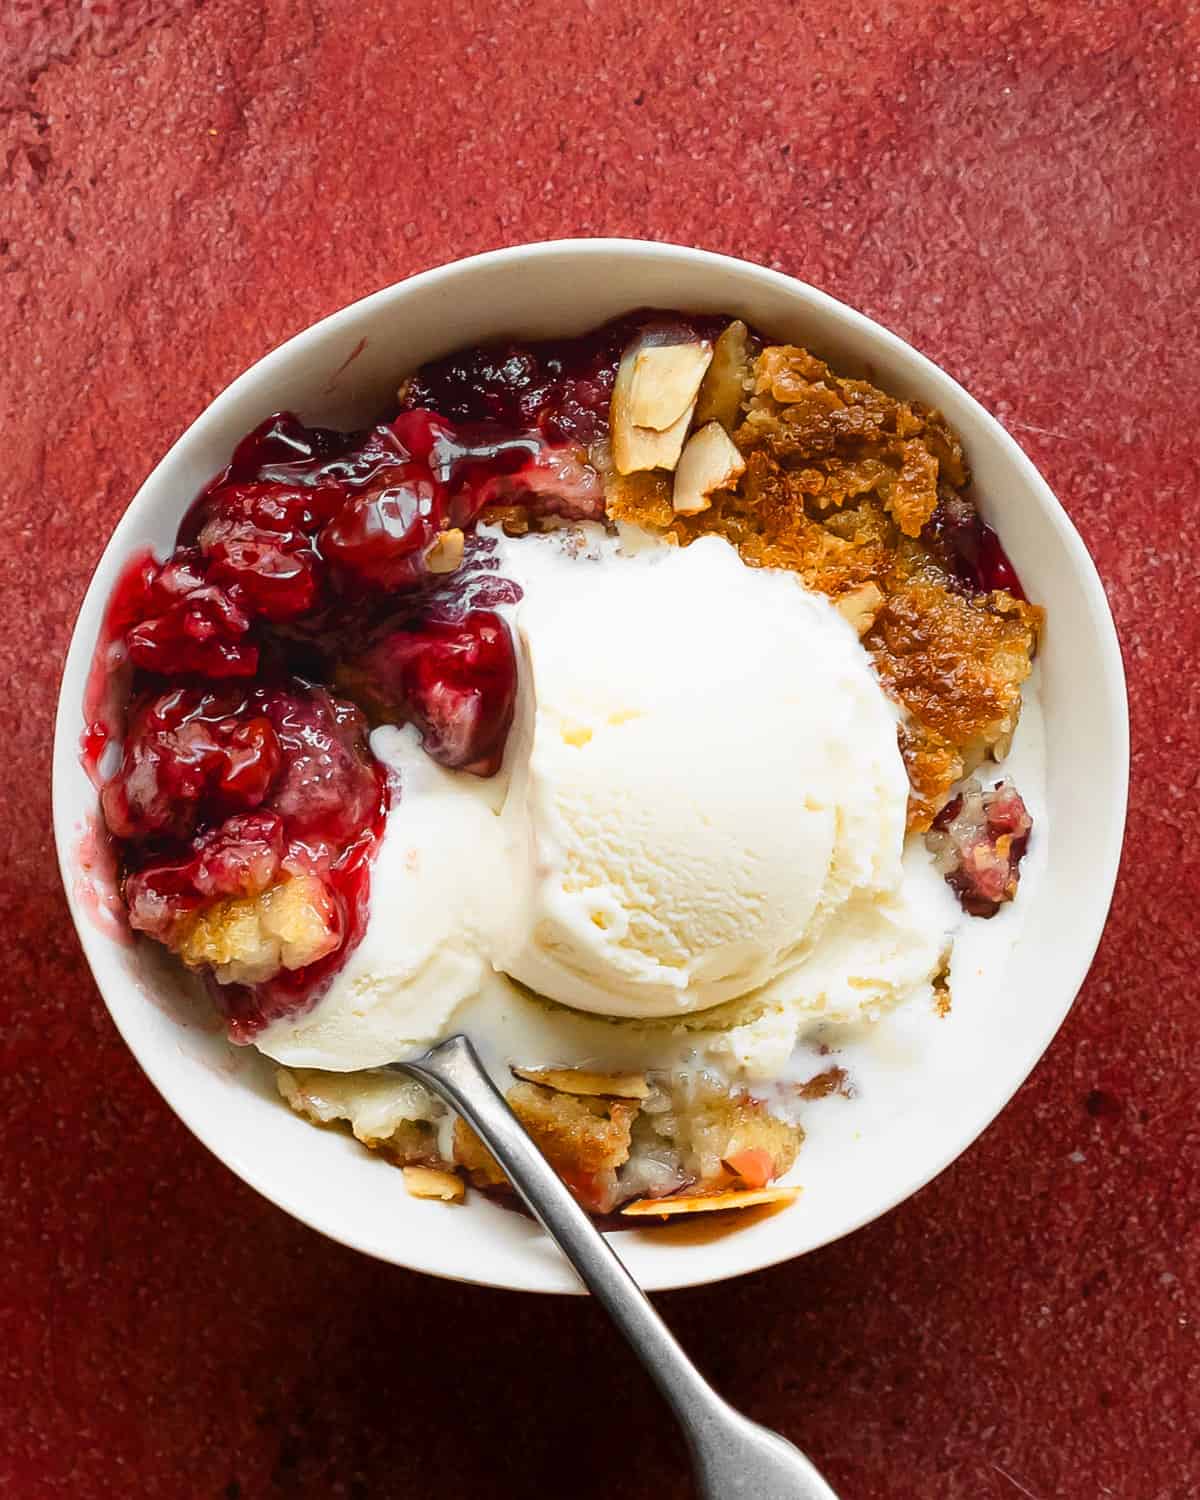 Cherry dump cake is an easy to make cherry cobbler with cake mix dessert. This recipe for cherry dump cake comes together quickly with pantry basics such as cake mix, cherry pie filling, canned or fresh cherries and butter. Top this cherry cobbler dump cake with vanilla ice cream for the perfect easy baked dessert. 